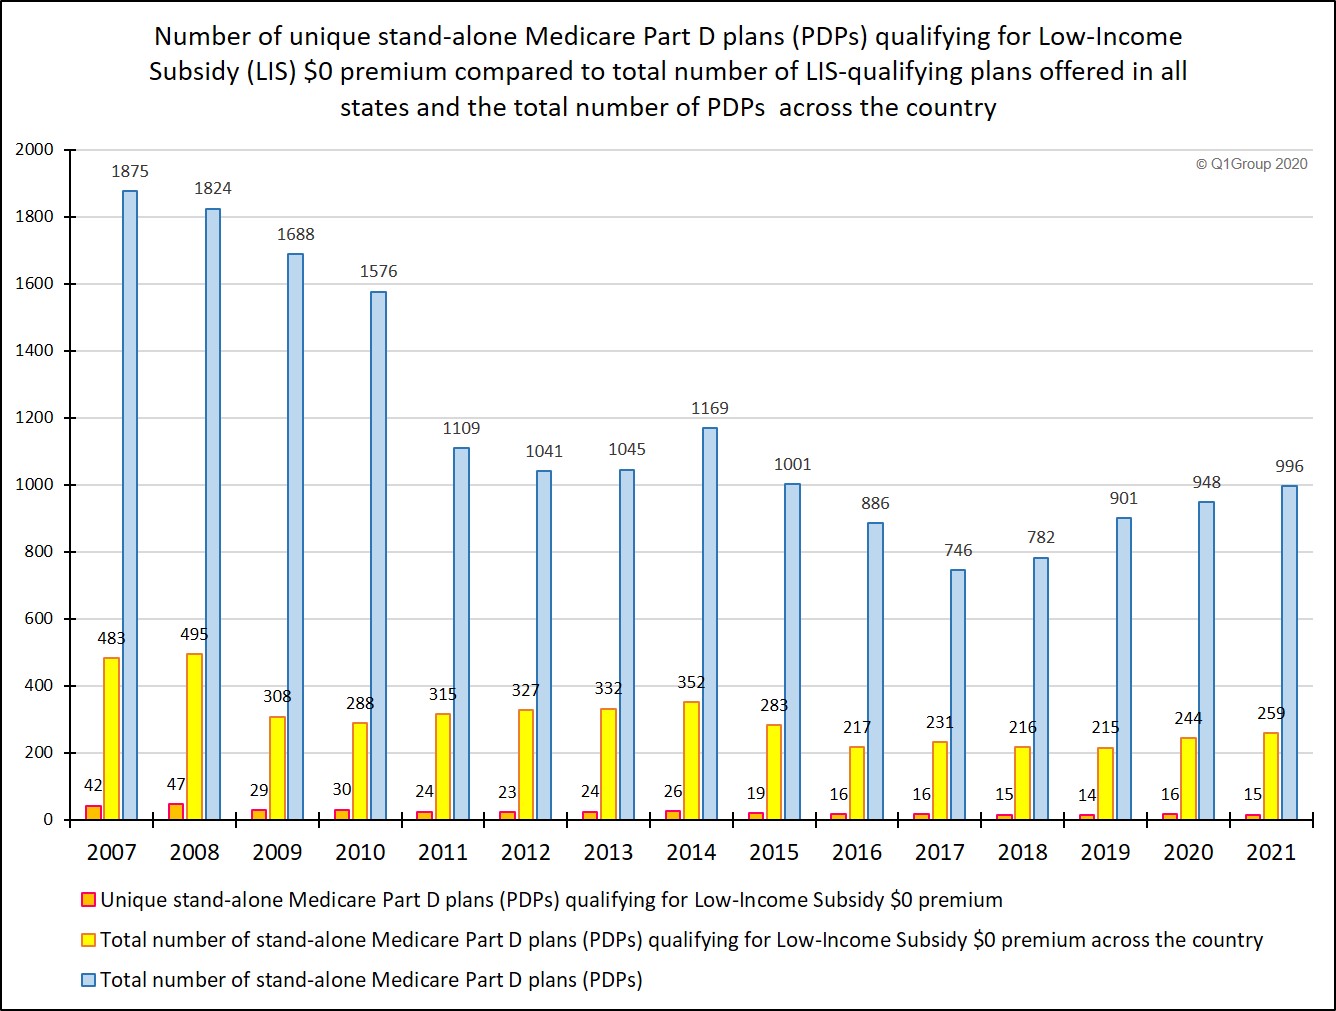 total LIS qualifying PDPs compared to total PDPs